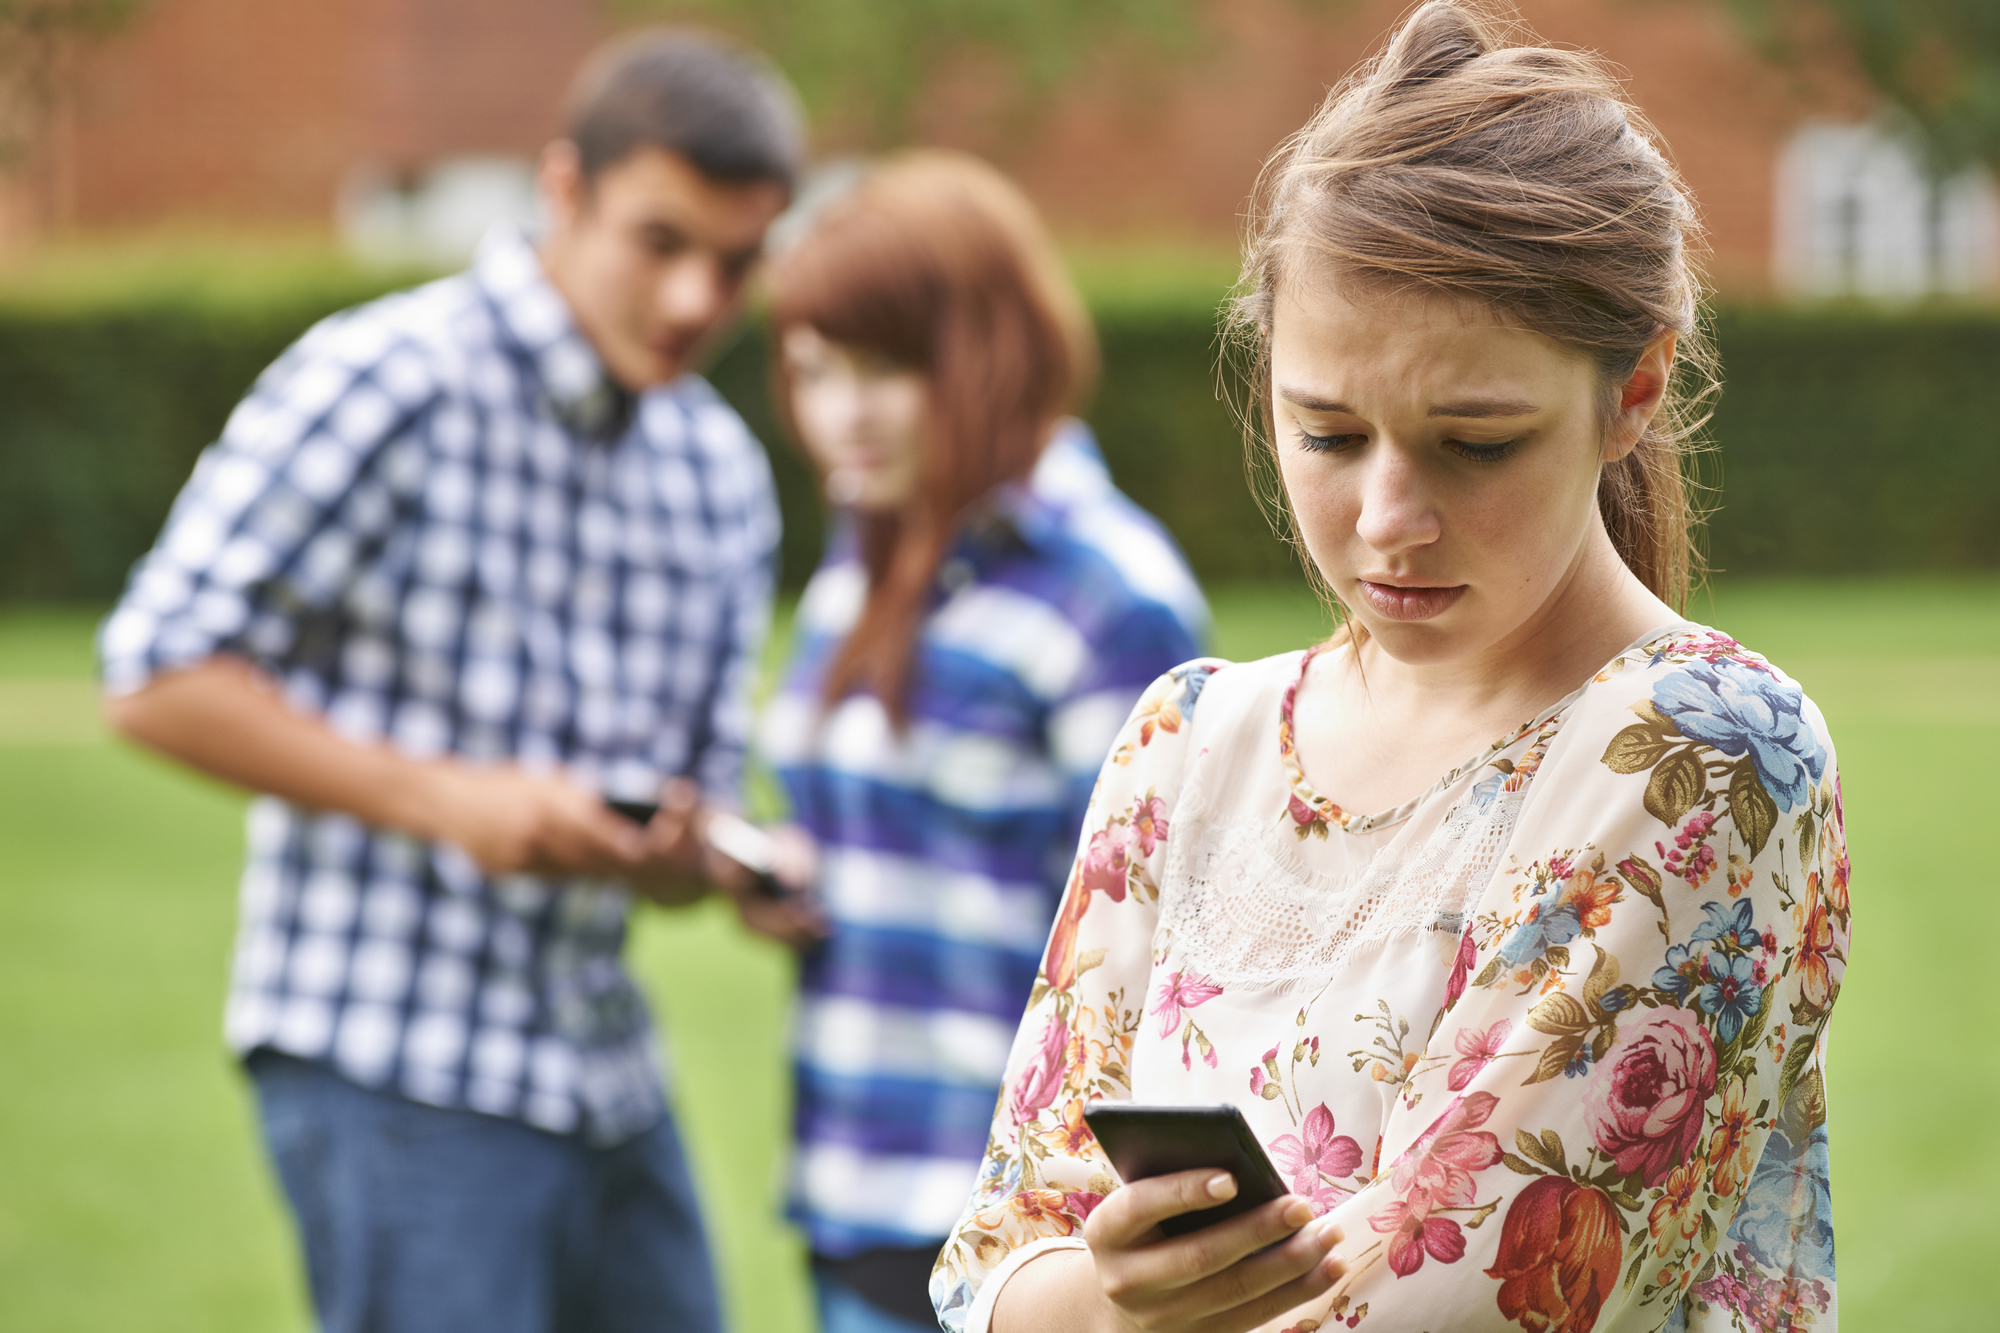 Cyberbullying is NOT a technology issue-here’s how to really combat it.